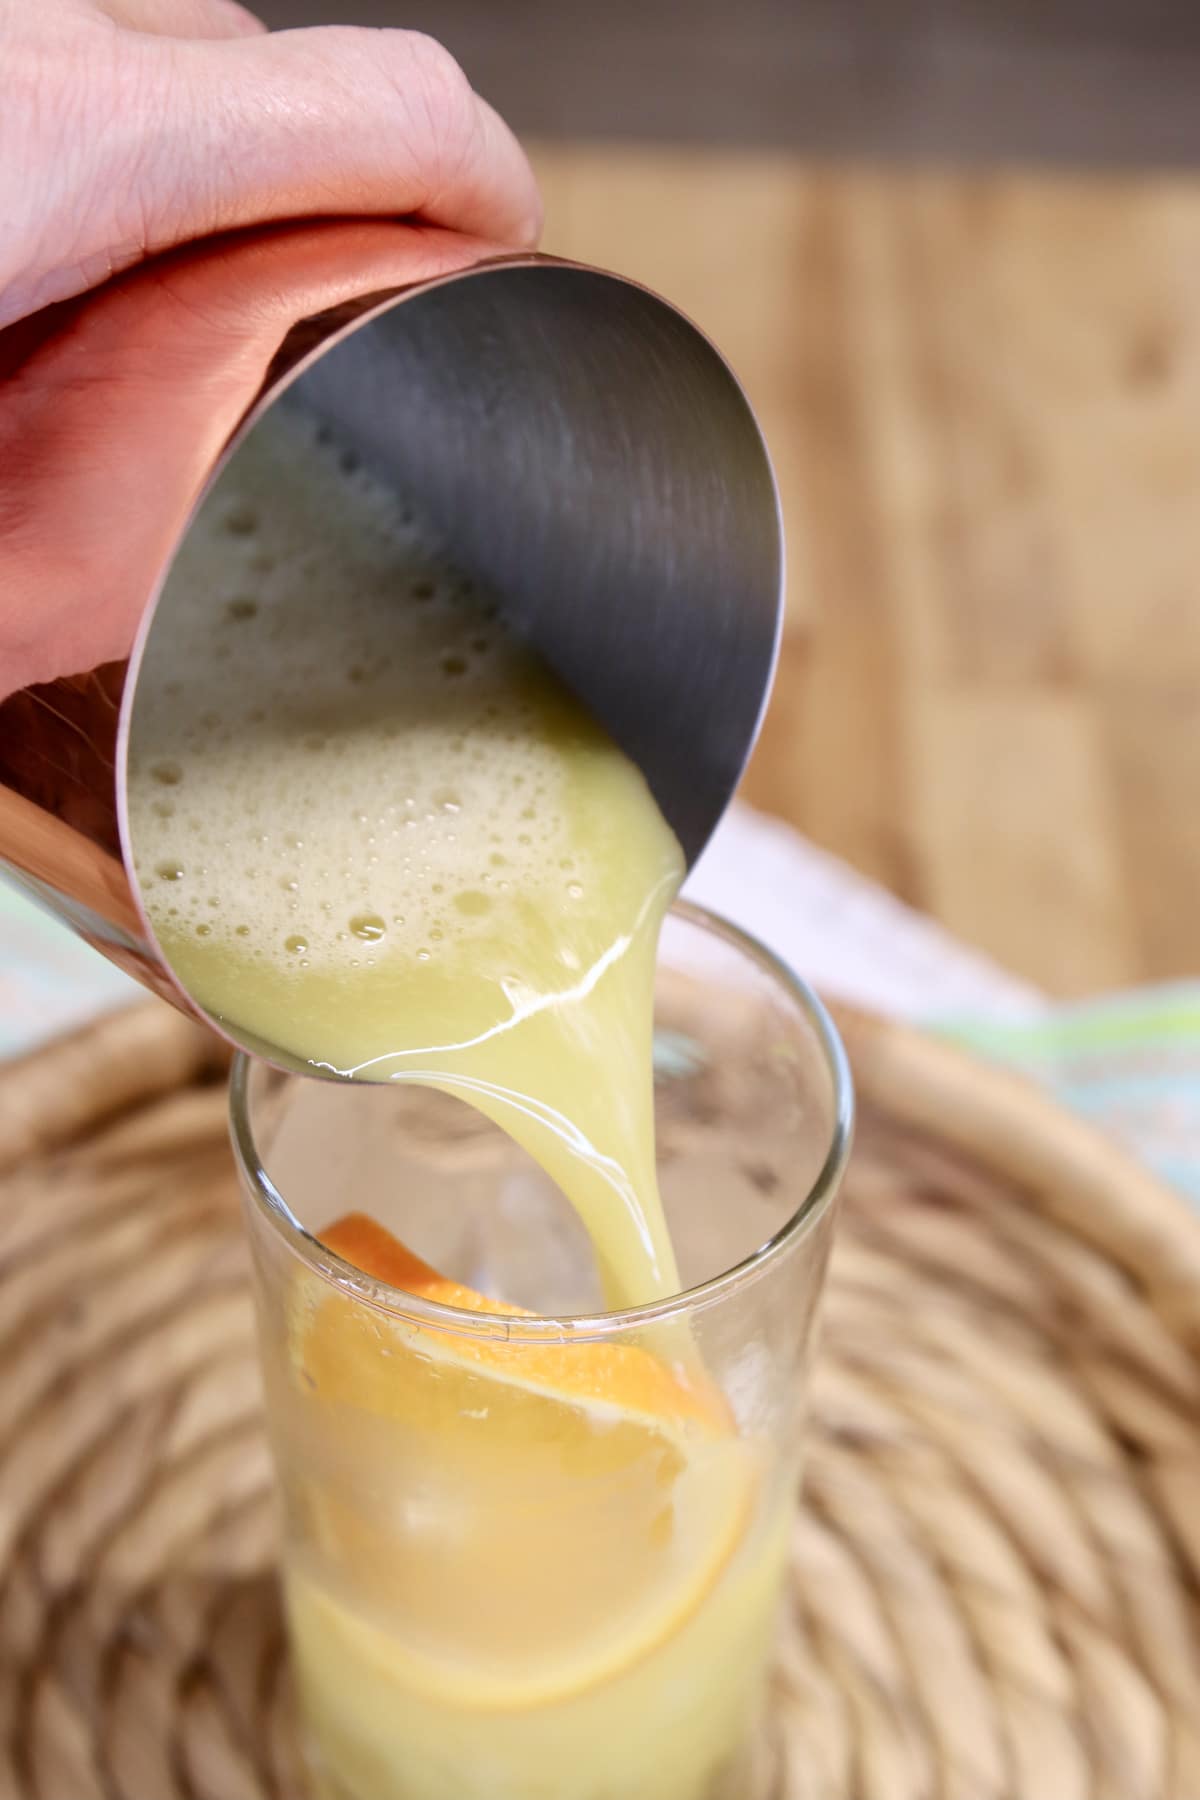 Pouring orange juice cocktail into a glass.